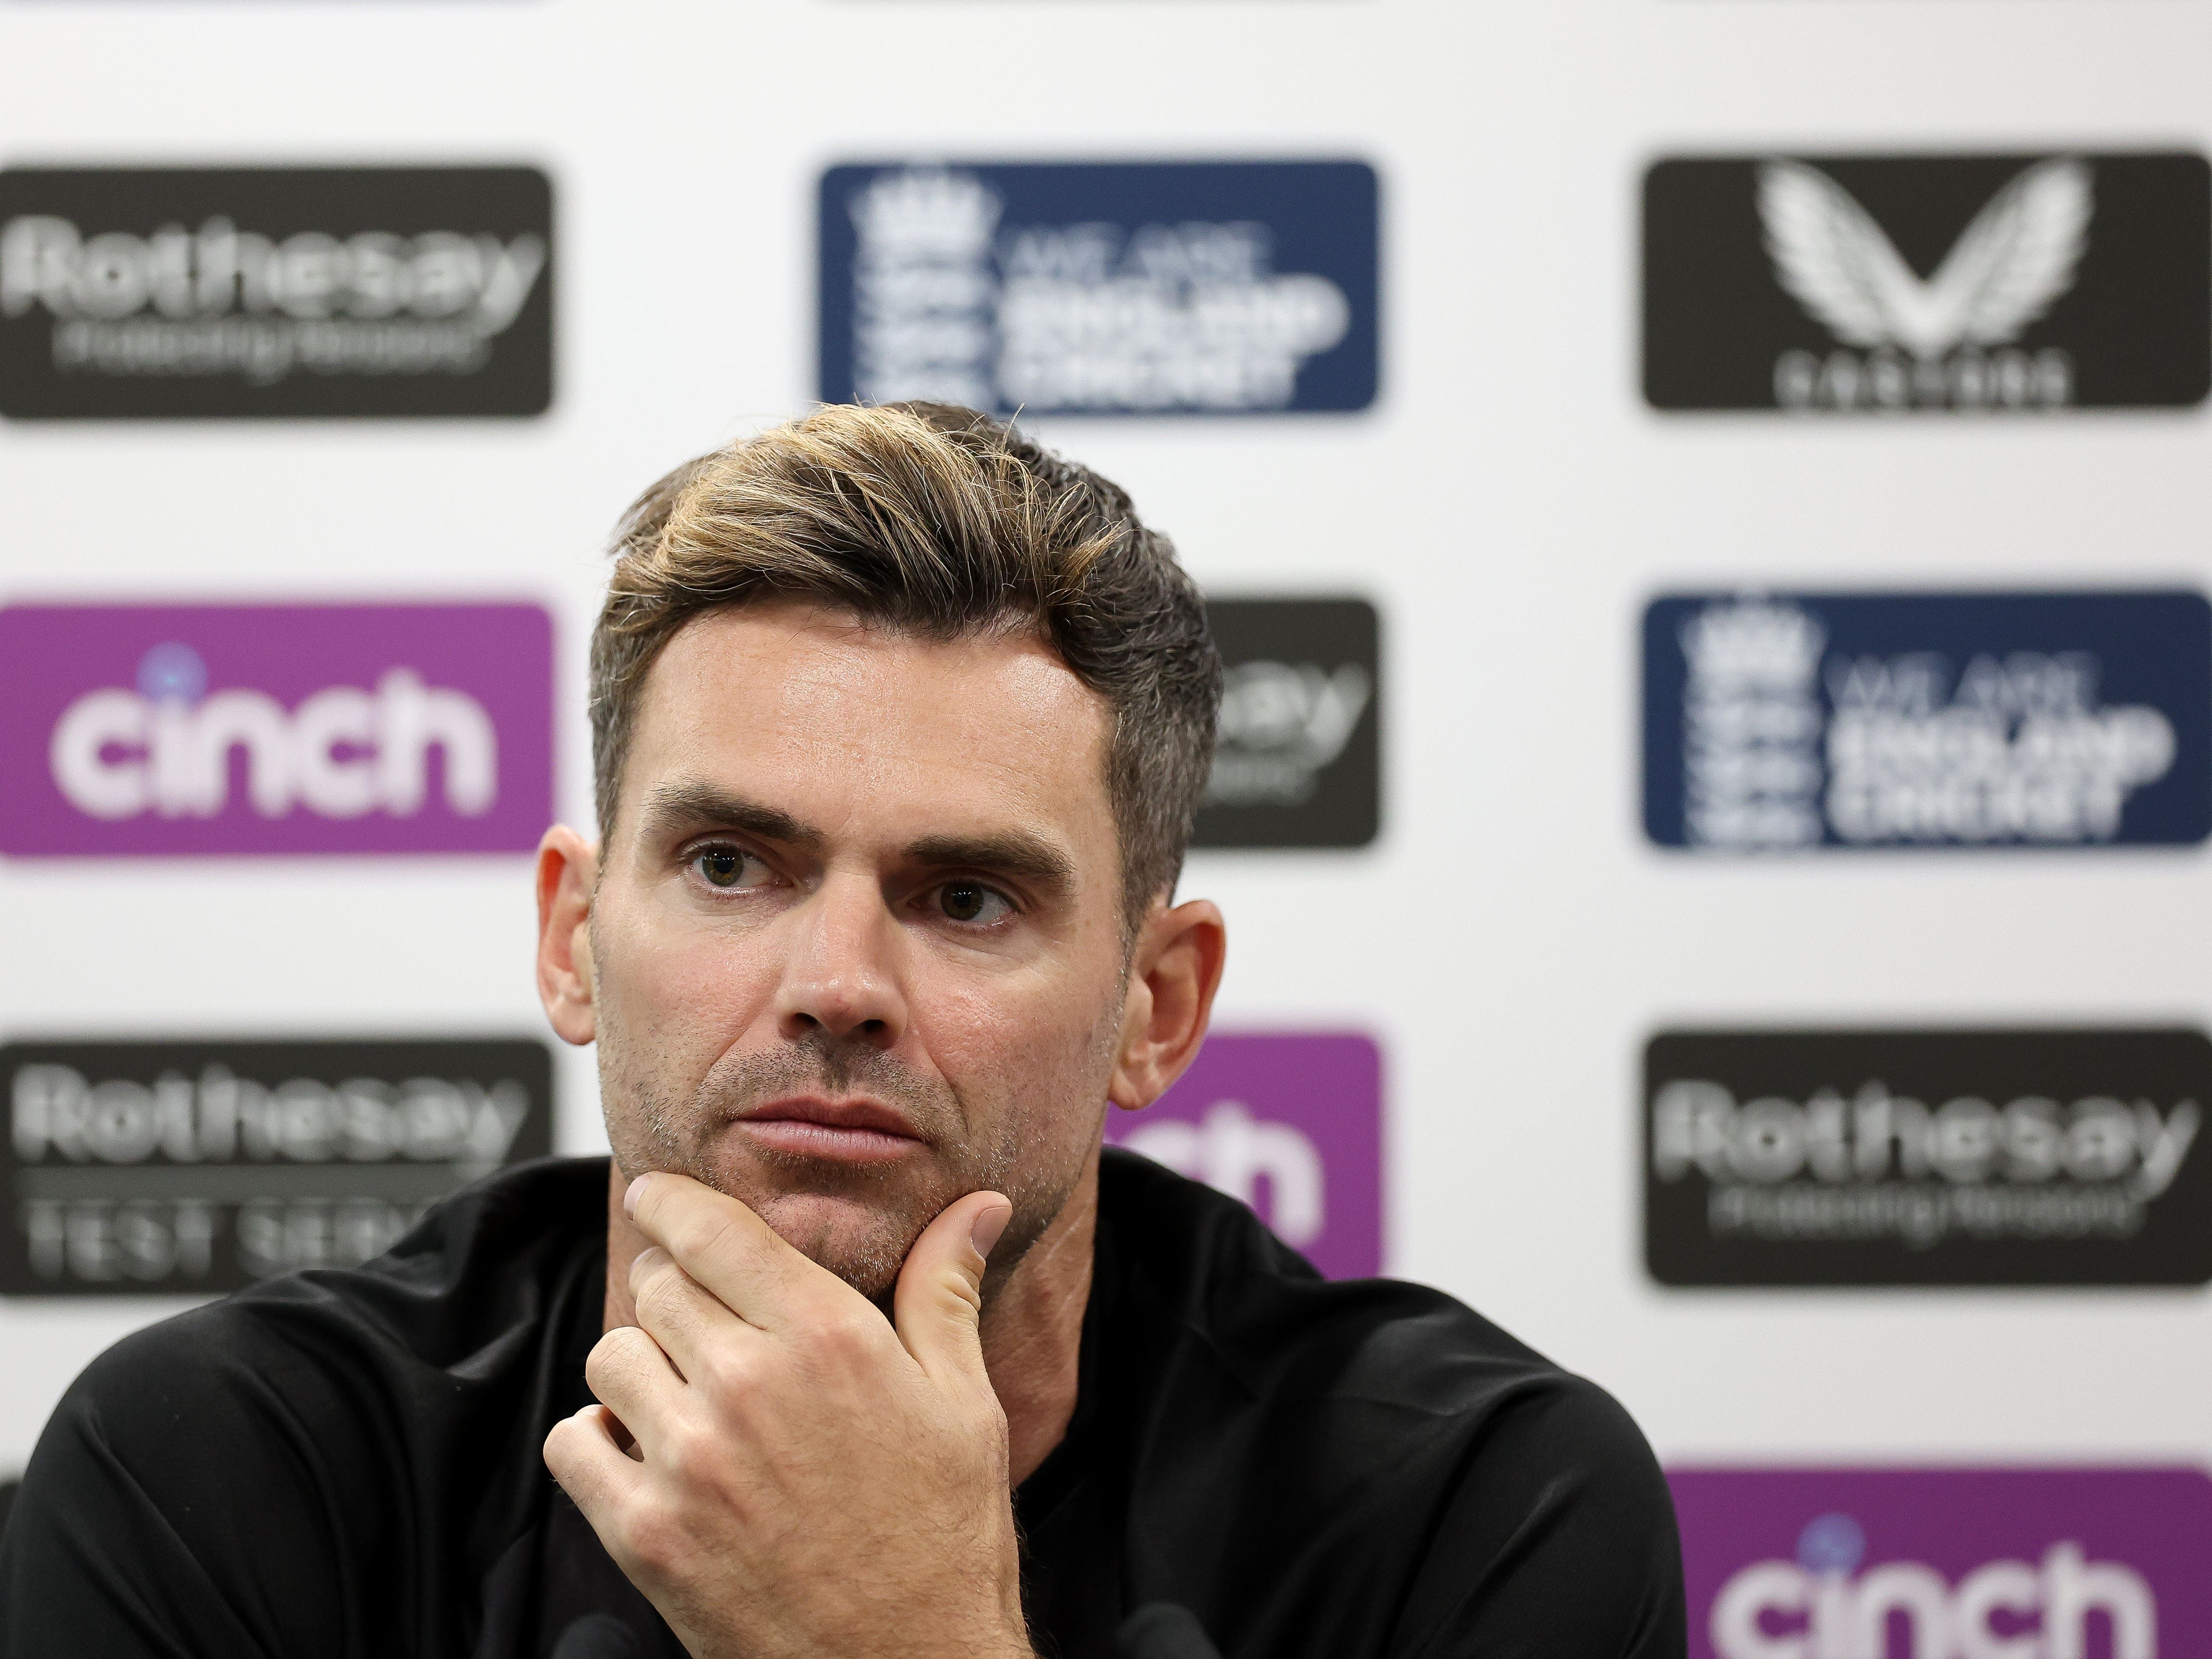 James Anderson focused on bowling to hold back tears during final Test match